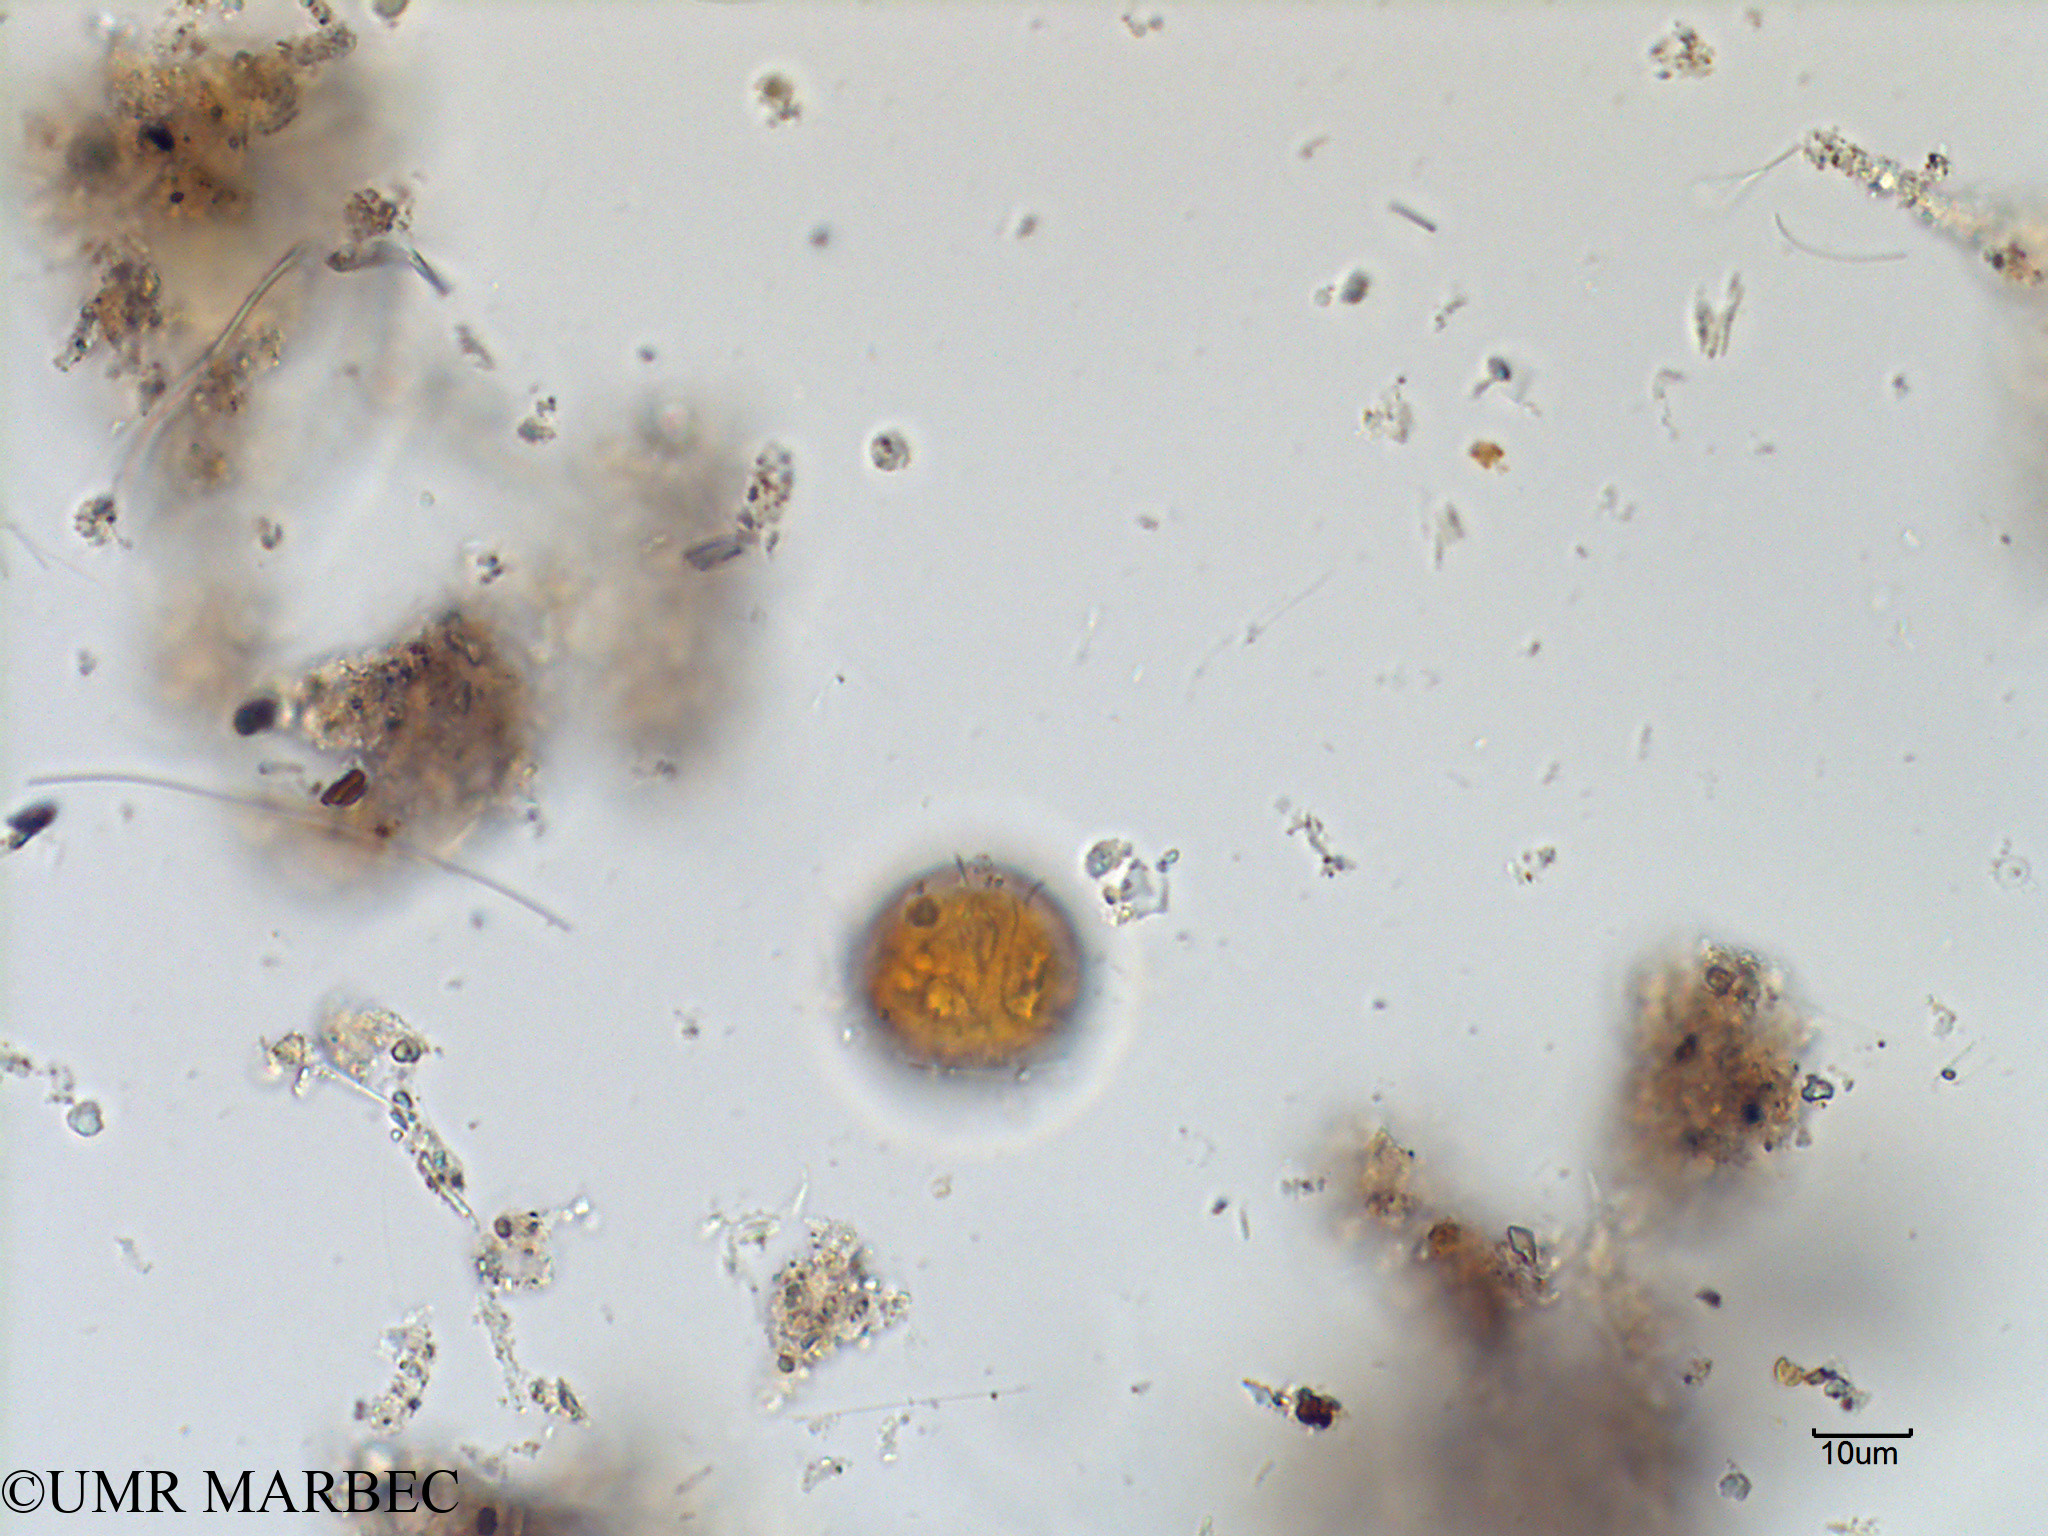 phyto/Scattered_Islands/mayotte_lagoon/SIREME May 2016/Protoperidinium sp42 (MAY4_proto lequel c-2).tif(copy).jpg